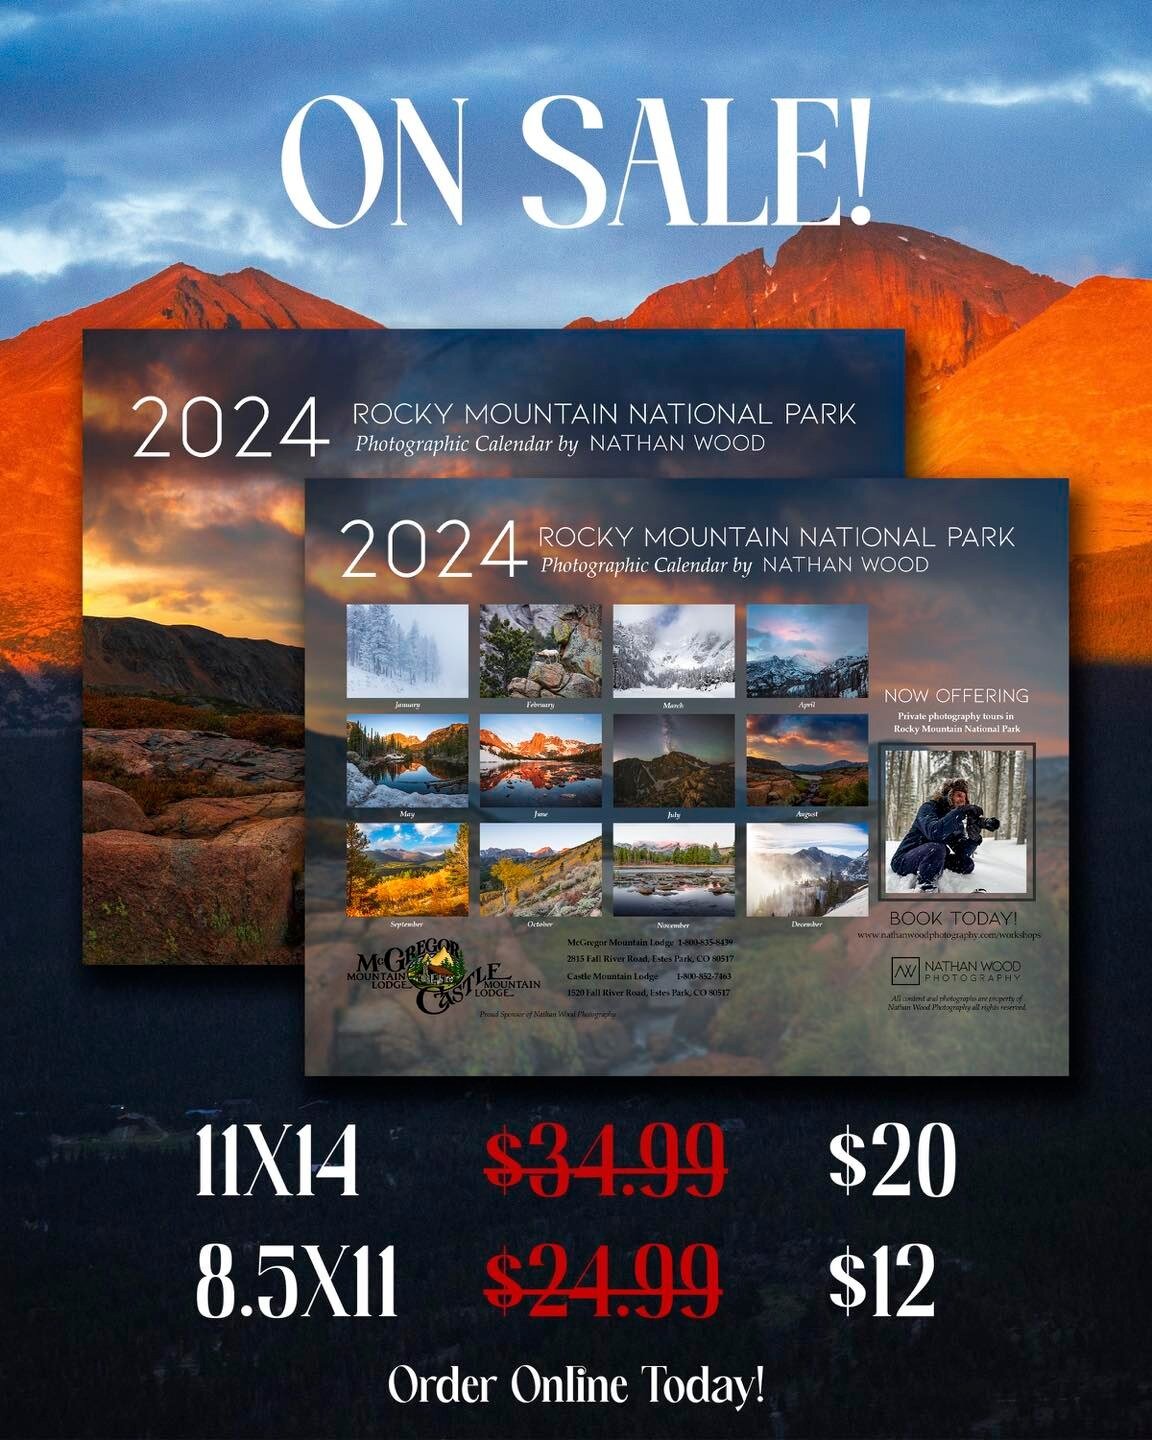 HUGE SALE!! Now until I sell out, my 2024 calendars are at a discounted price! The smaller size are now $12 and the larger size are now $20!

Order yours on my website while supplies last!

#nationalpark #rockymountainnationalpark #nationalparks #vis